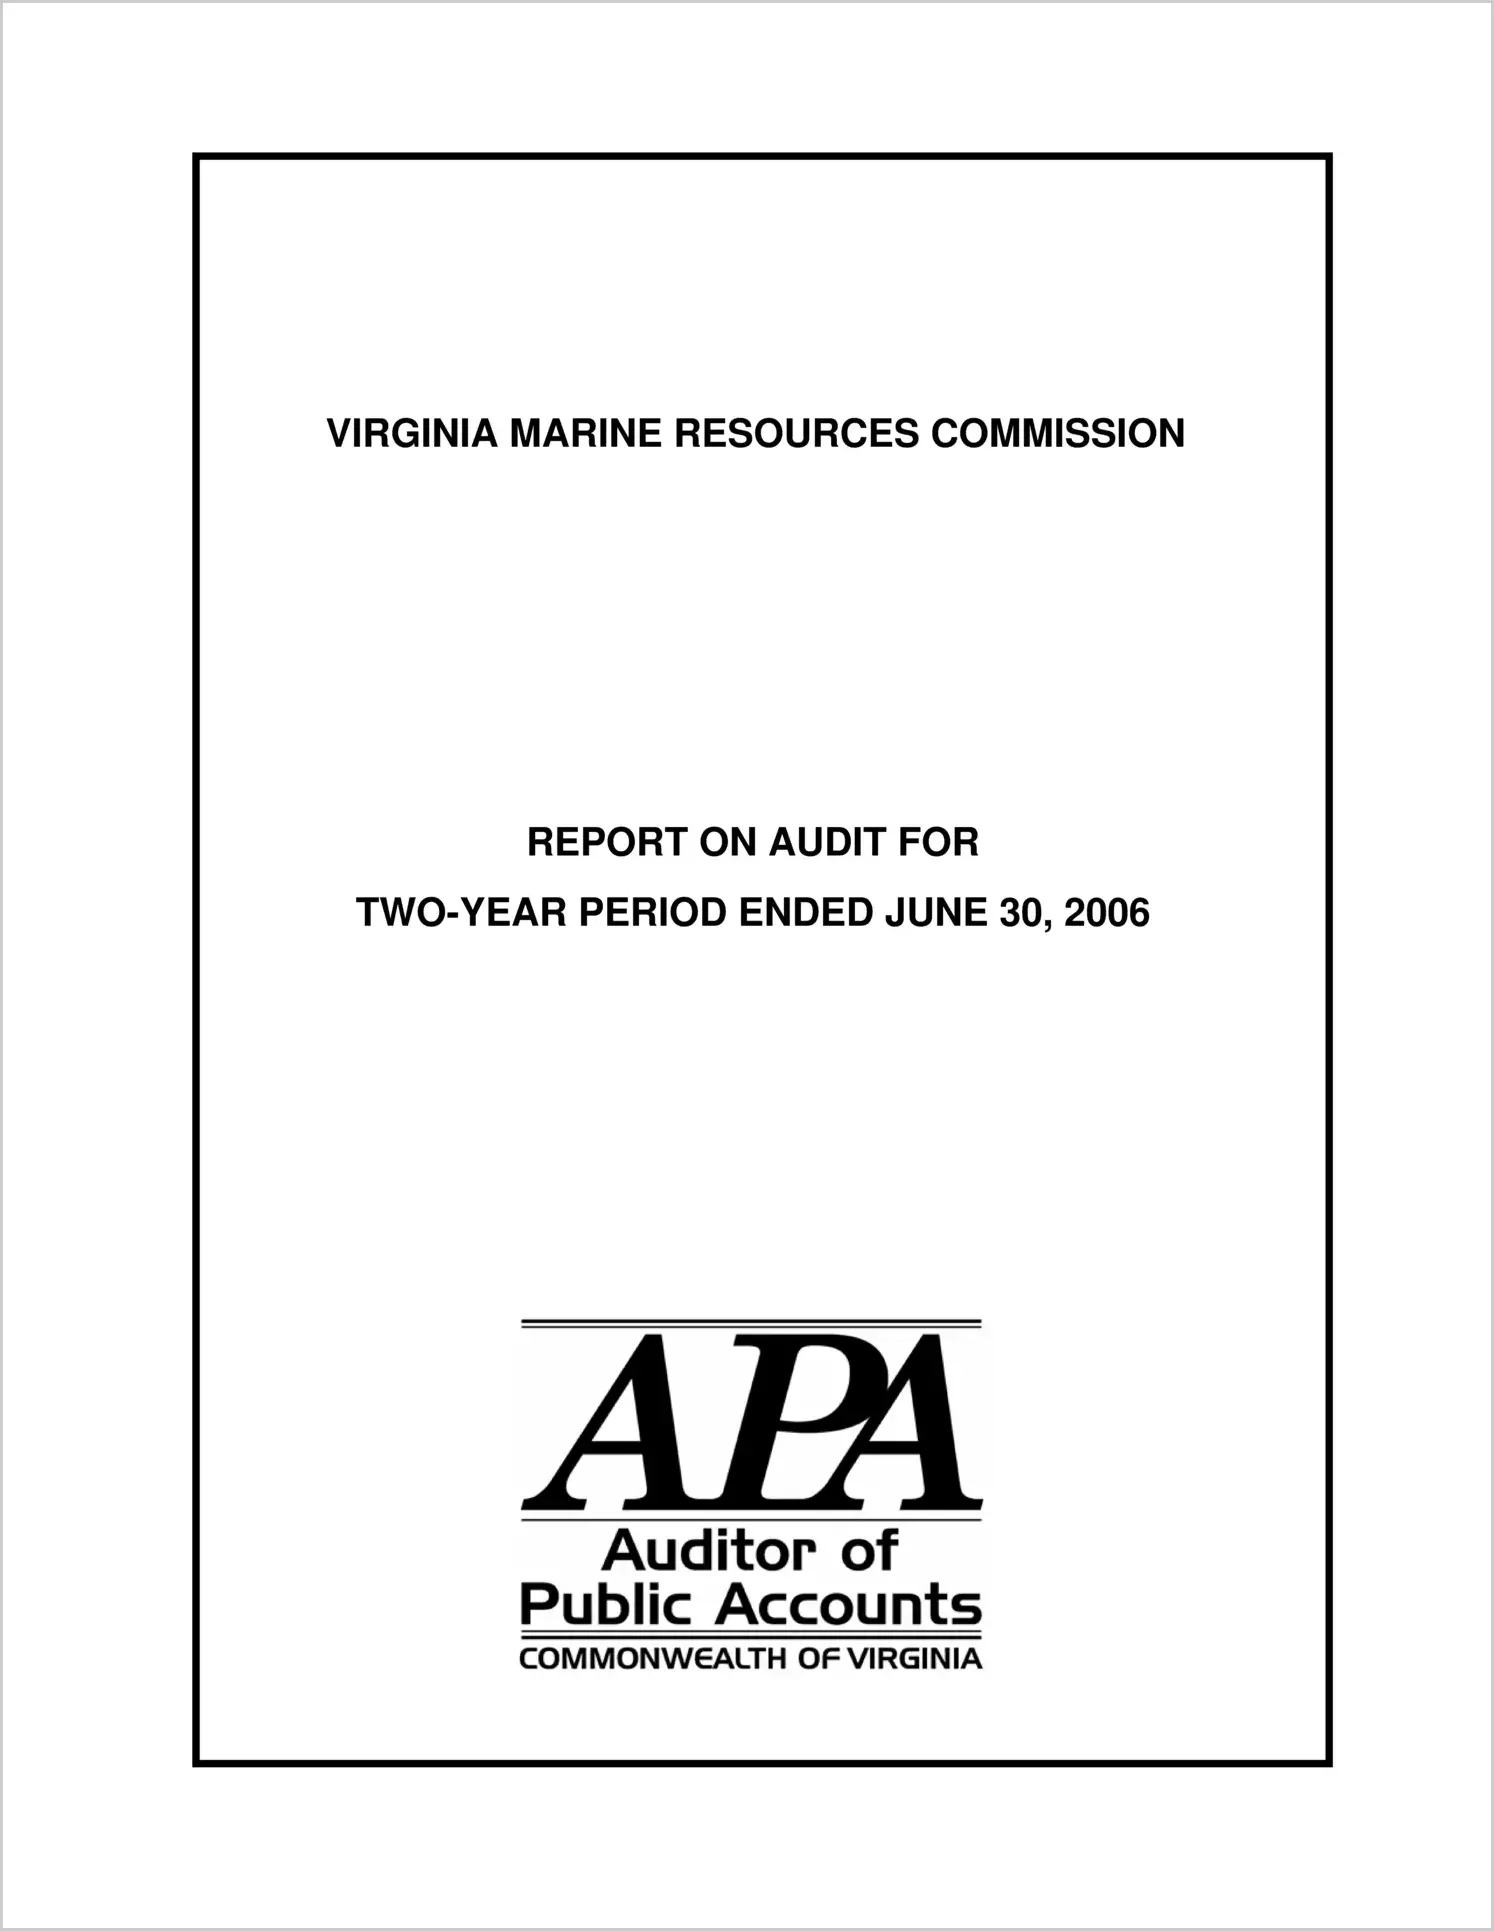 Virginia Marine Resources Commission Report on Audit for two-year period ended June 30, 2006